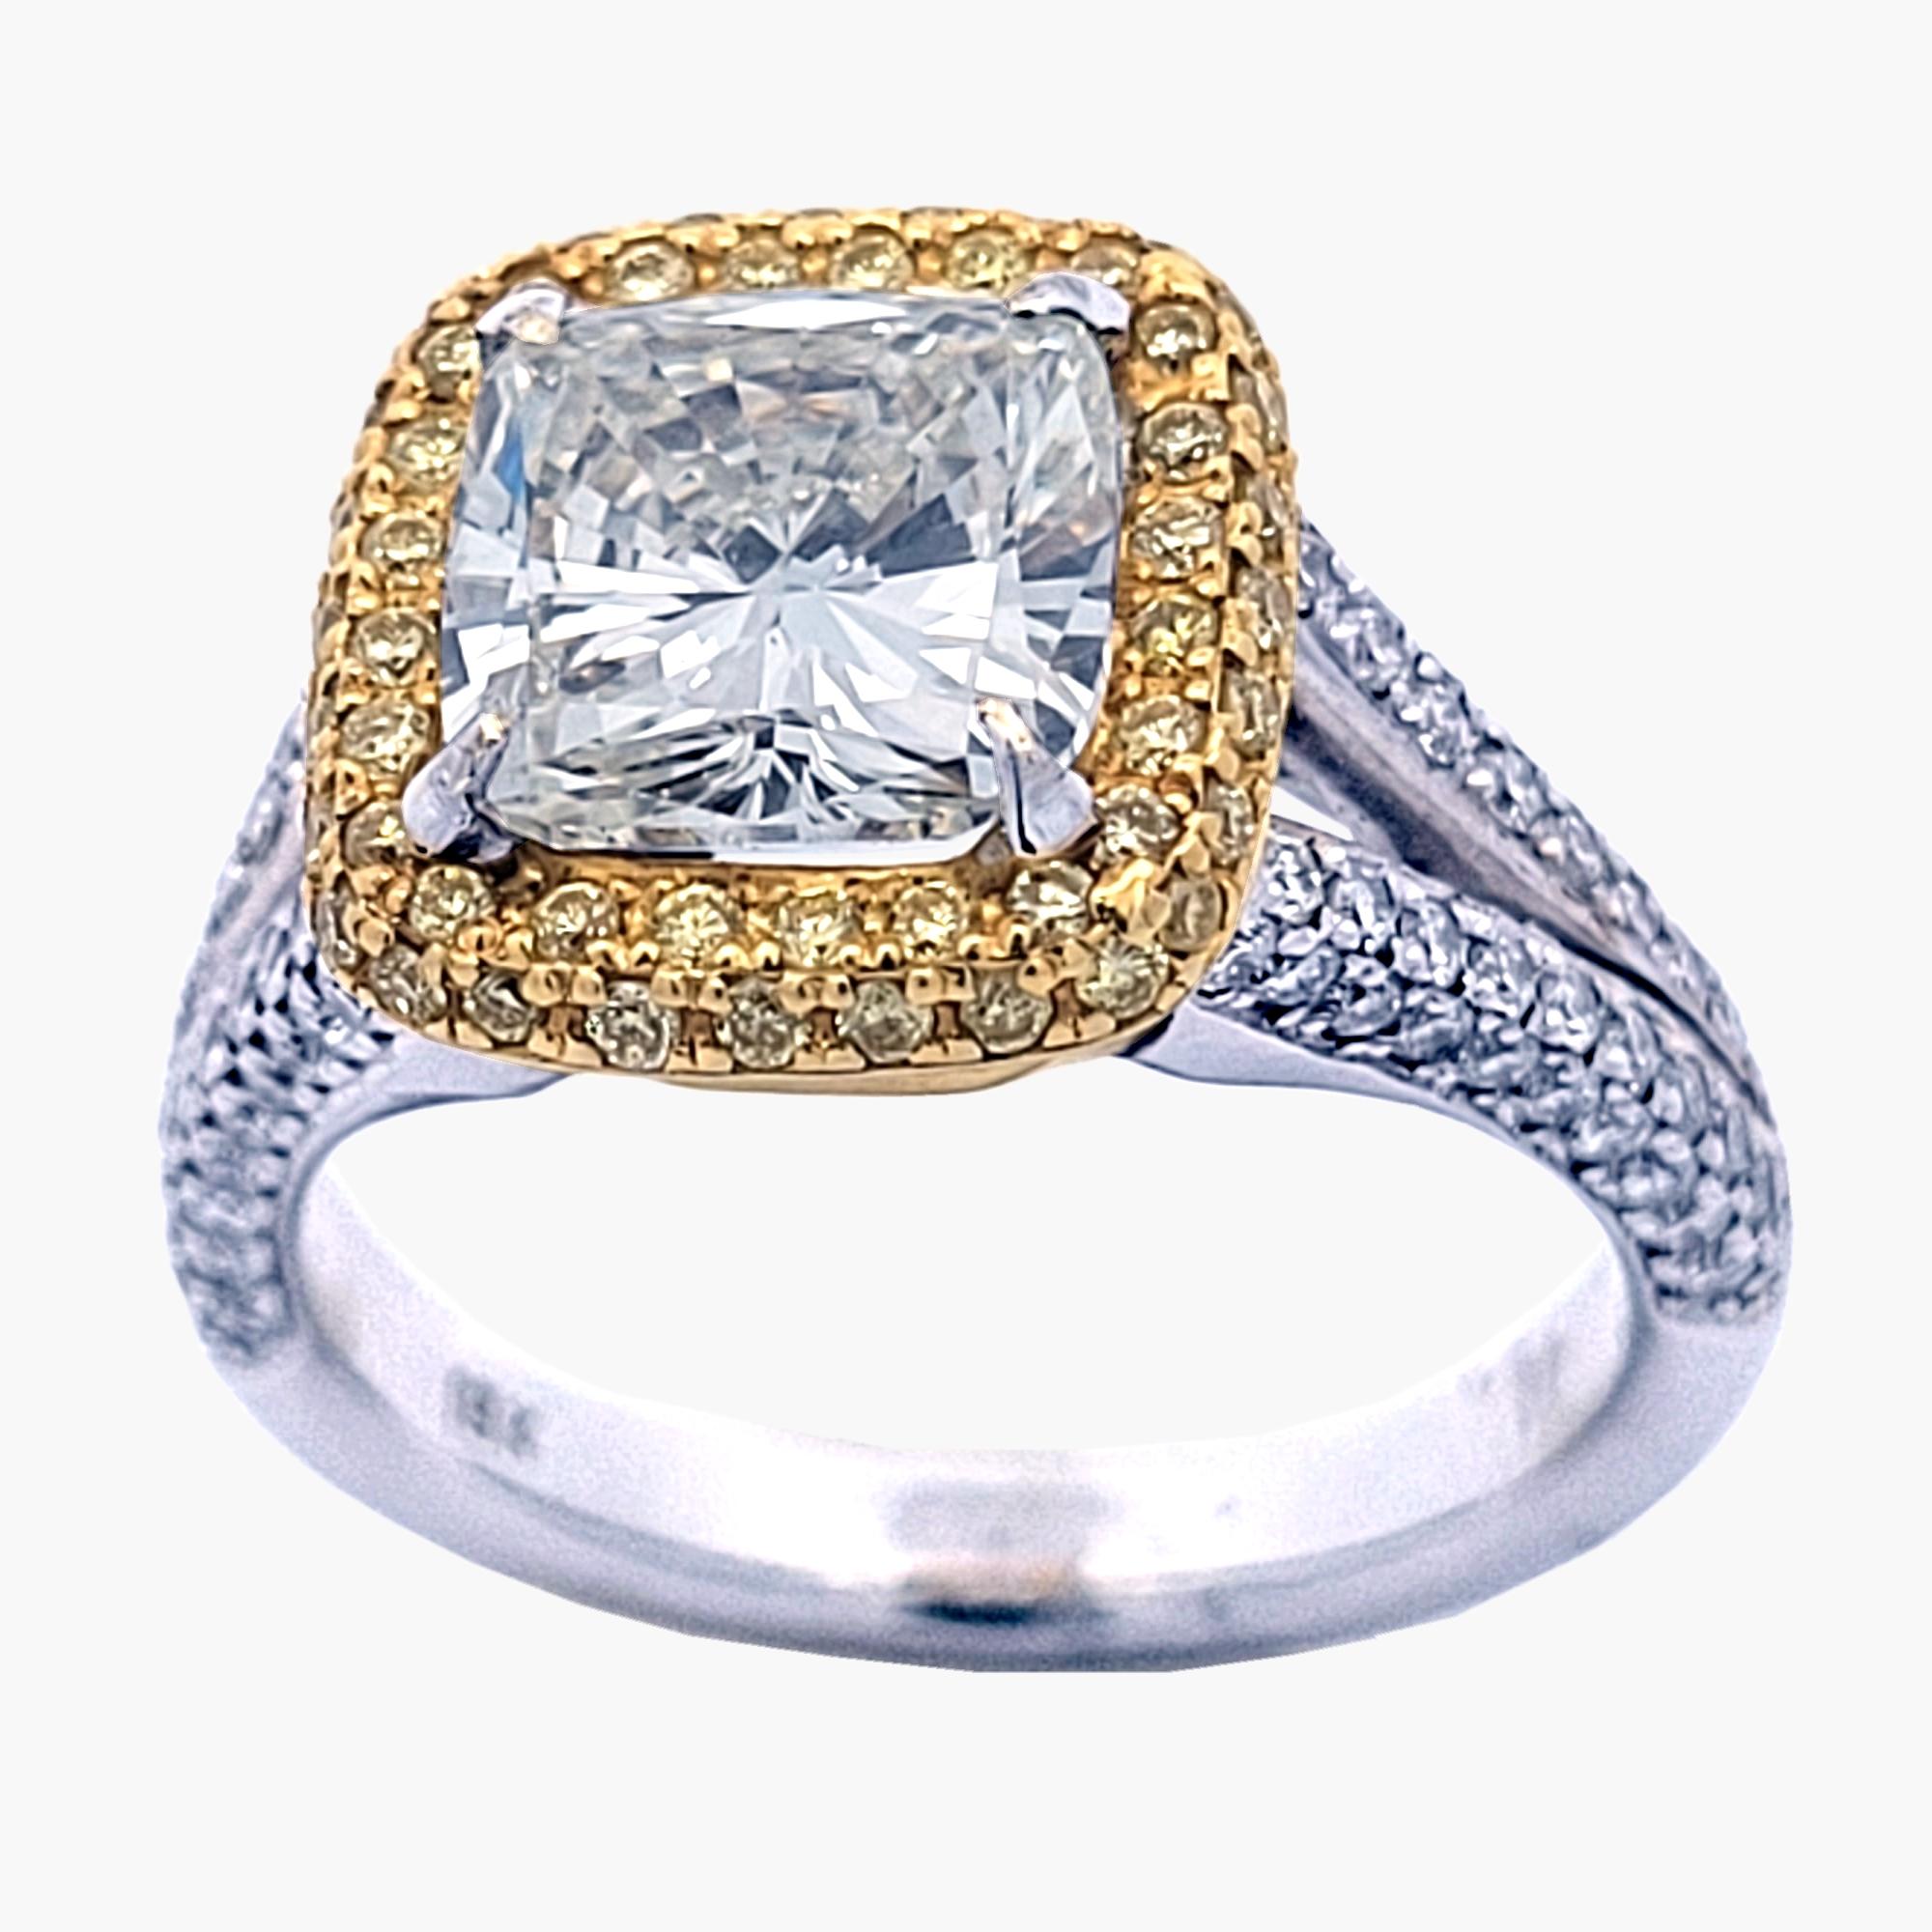 A Beautiful K/VS2 EGL Certified 2.08 Ct  Square Cushion Cut Natural center Diamond set in a gorgeous 18k White Two Tone Pave set Engagement Ring with Halo. The Halo is set with Yellow diamonds. Total weight of 0.89 Ct on the side.

Diamond